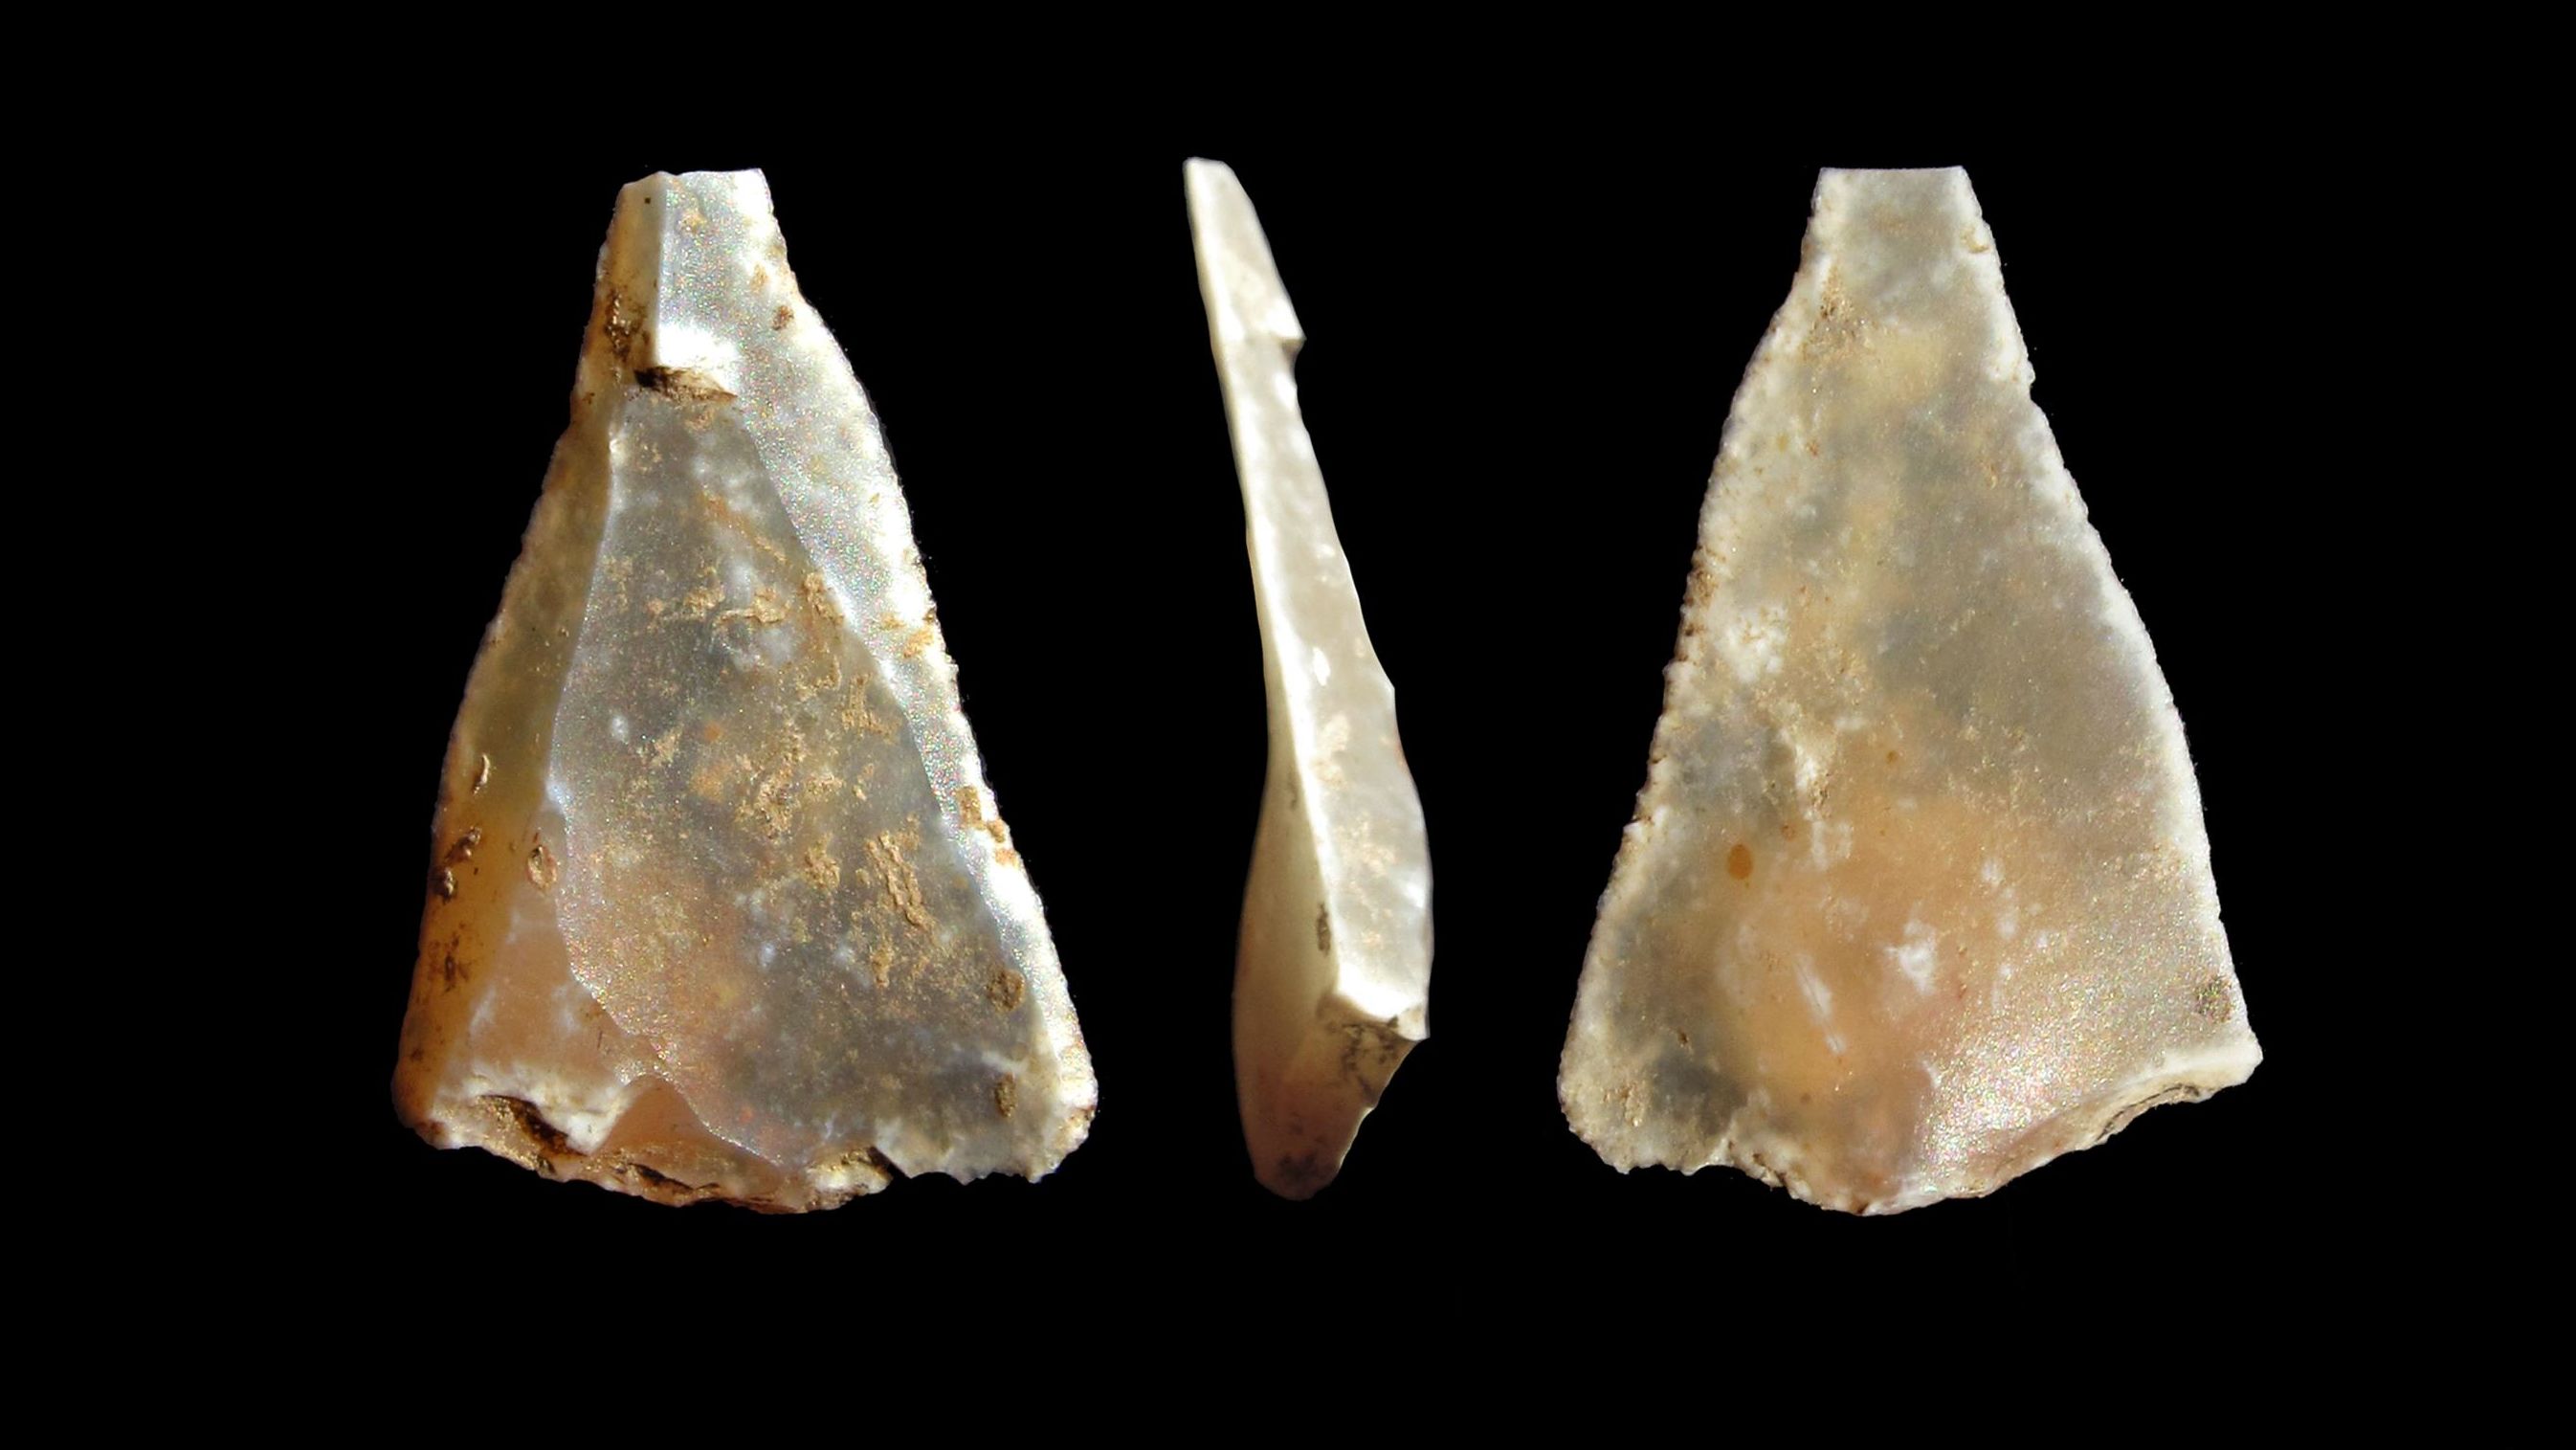 These tiny stone points (about 0.4 inch or 10 millimeters long) were made by the earliest known modern humans in western Europe.